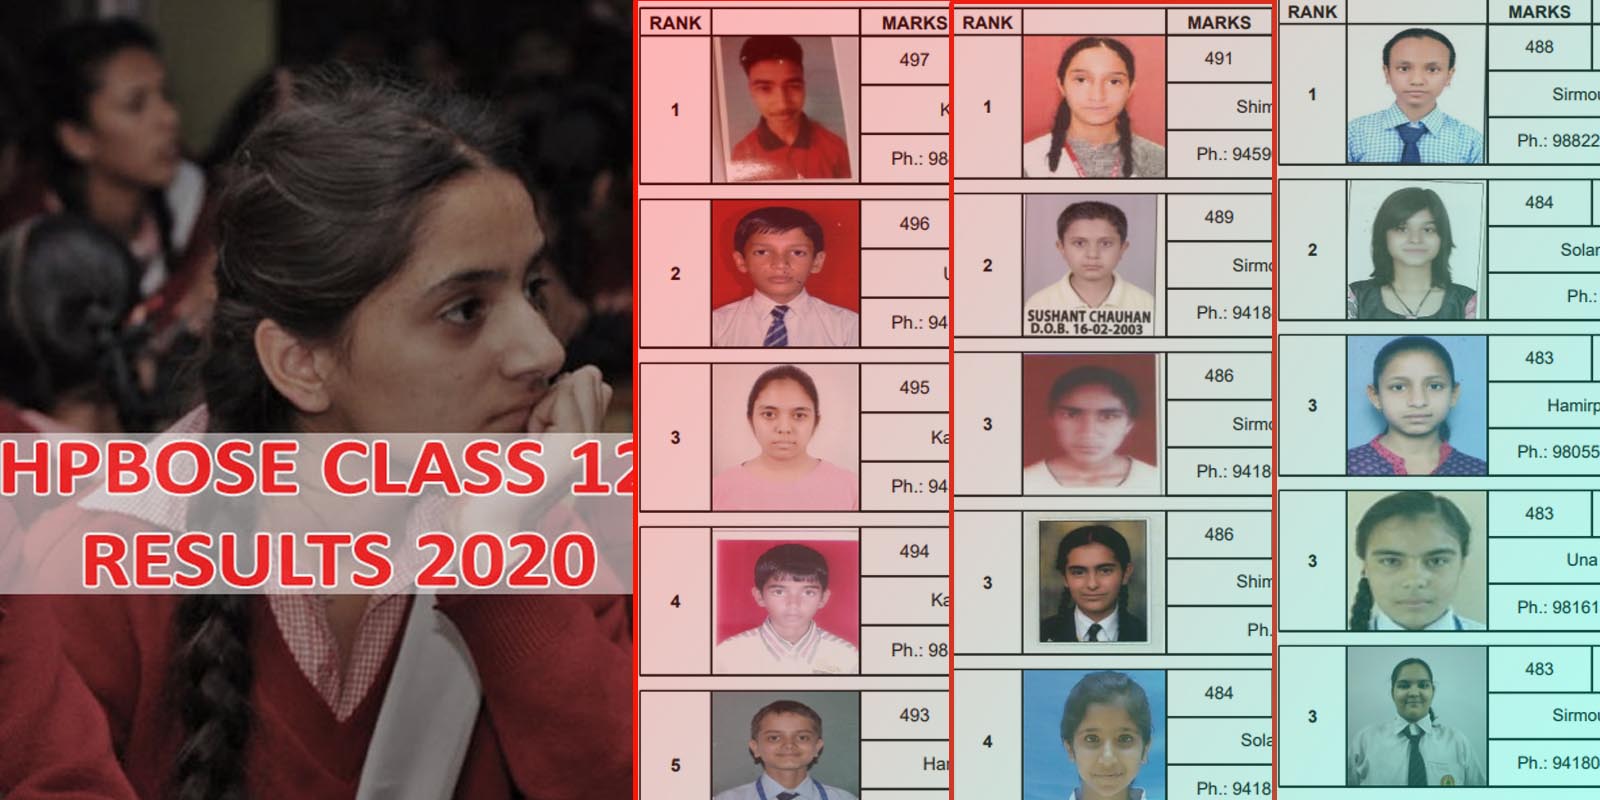 Himachal Pradesh HPBOSE Class 12 merit list 2020 and toppers